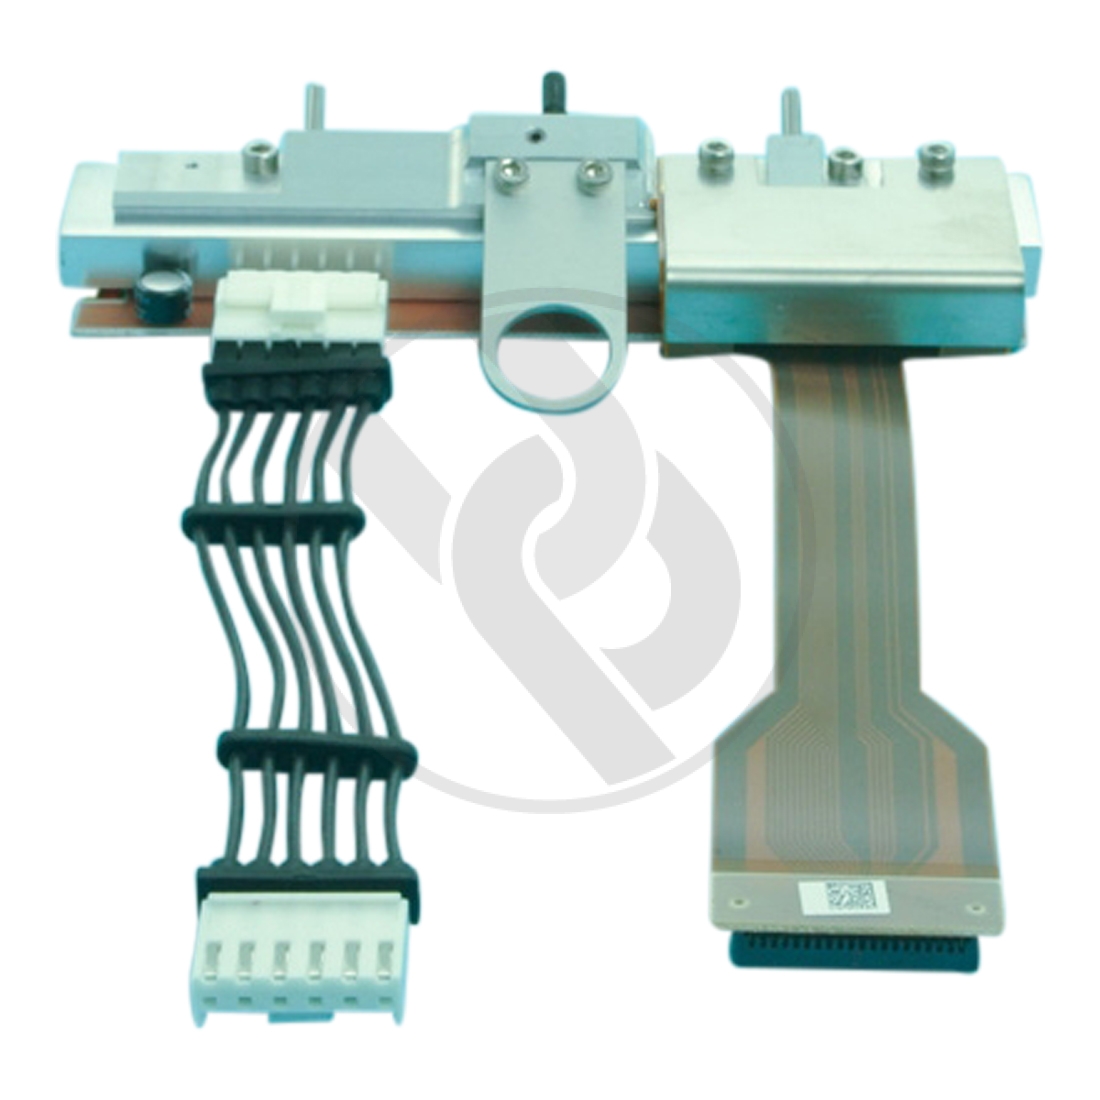 Thermal printhead 128mm, type X60, for Markem enm10068332